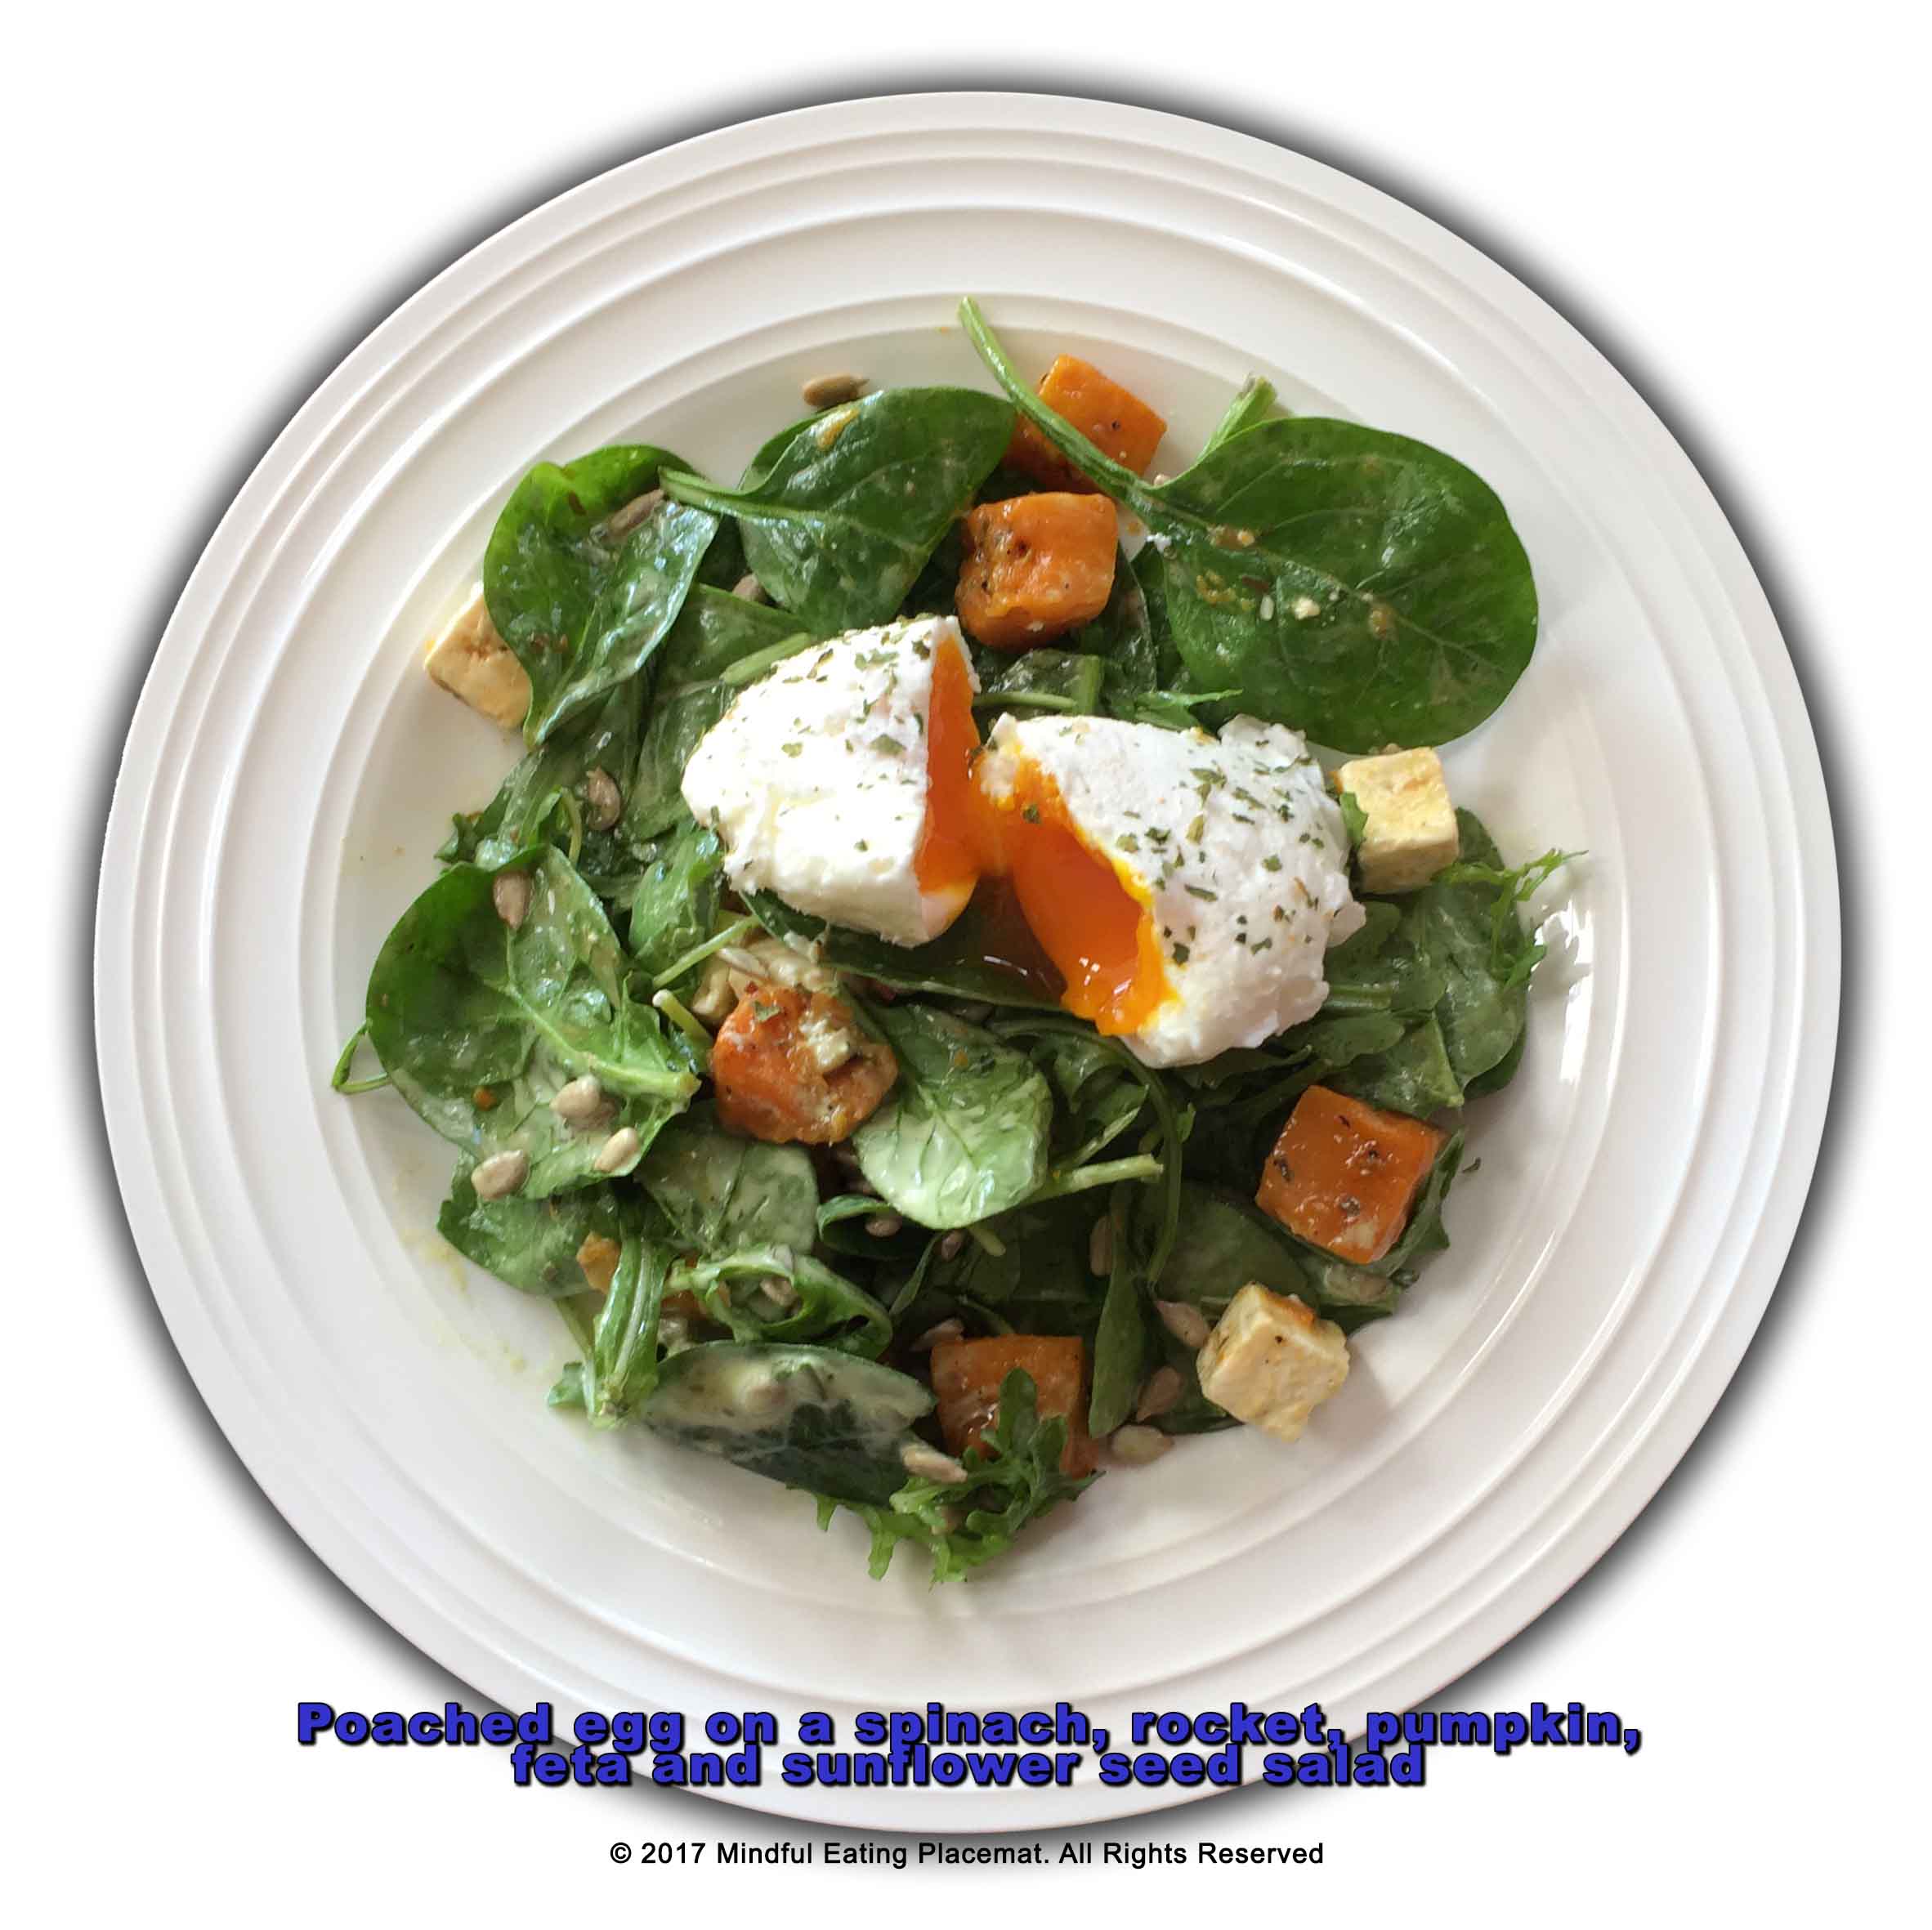 Poached egg on a spinach, rocket, pumpkin, feta and sunflower seed salad